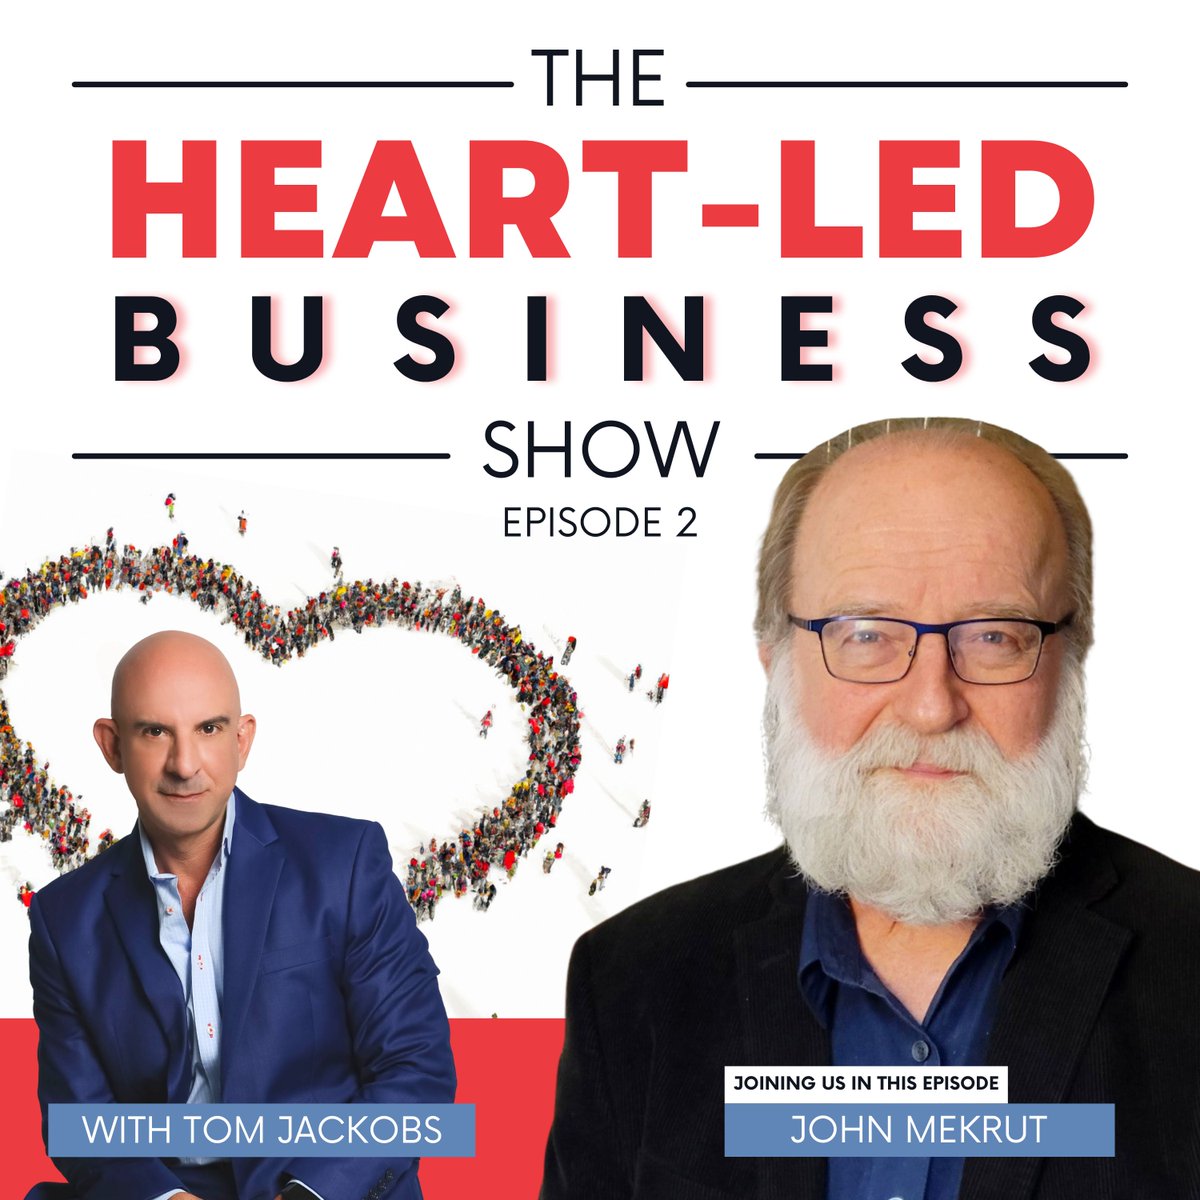 Elevate your business with the power of care! ❤️💼 Tune into the latest episode of Heart-Led Business Show to discover how putting customers first not only feels good but also fuels success. #podcast #HeartLedBusiness #Wellness #CustomerLove #HeartOfBusiness